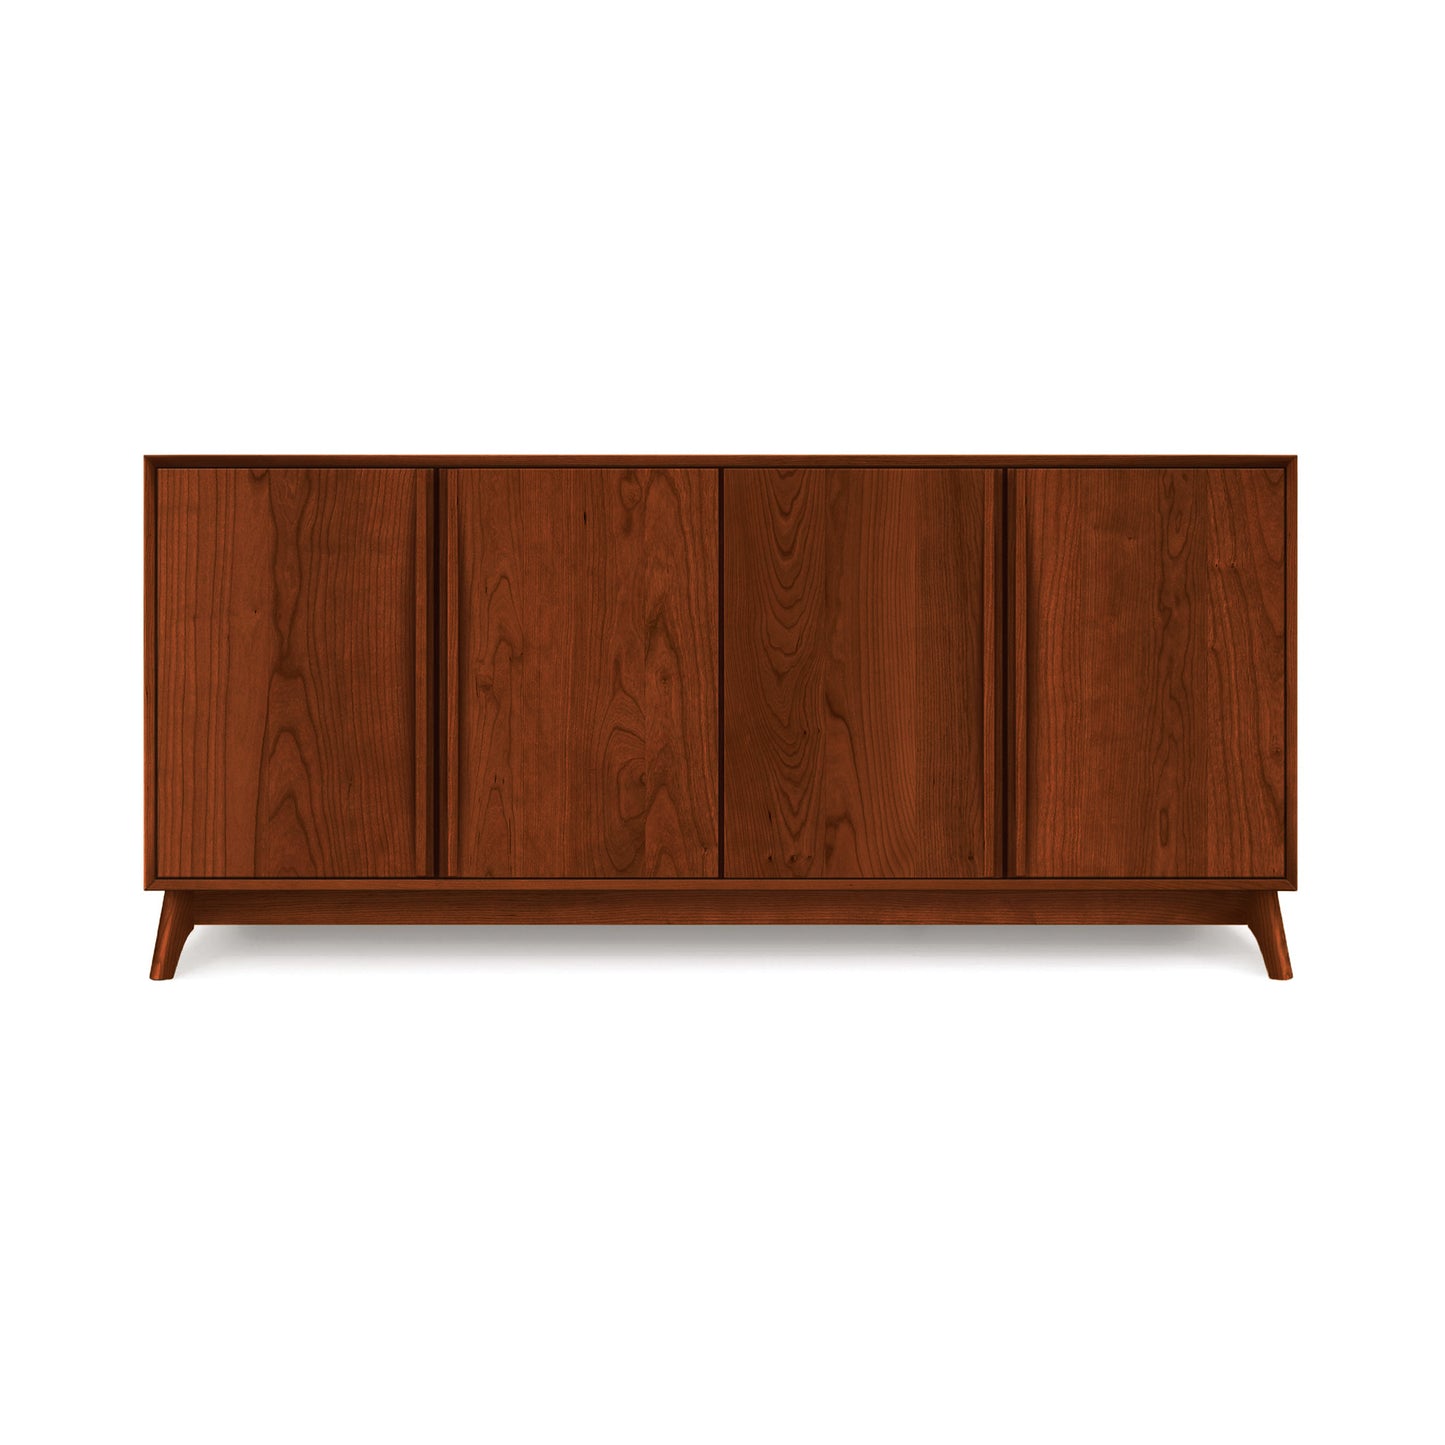 A luxury wooden sideboard with closed doors, standing on angled legs, isolated on a white background - Catalina 4-Door Buffet by Copeland Furniture.